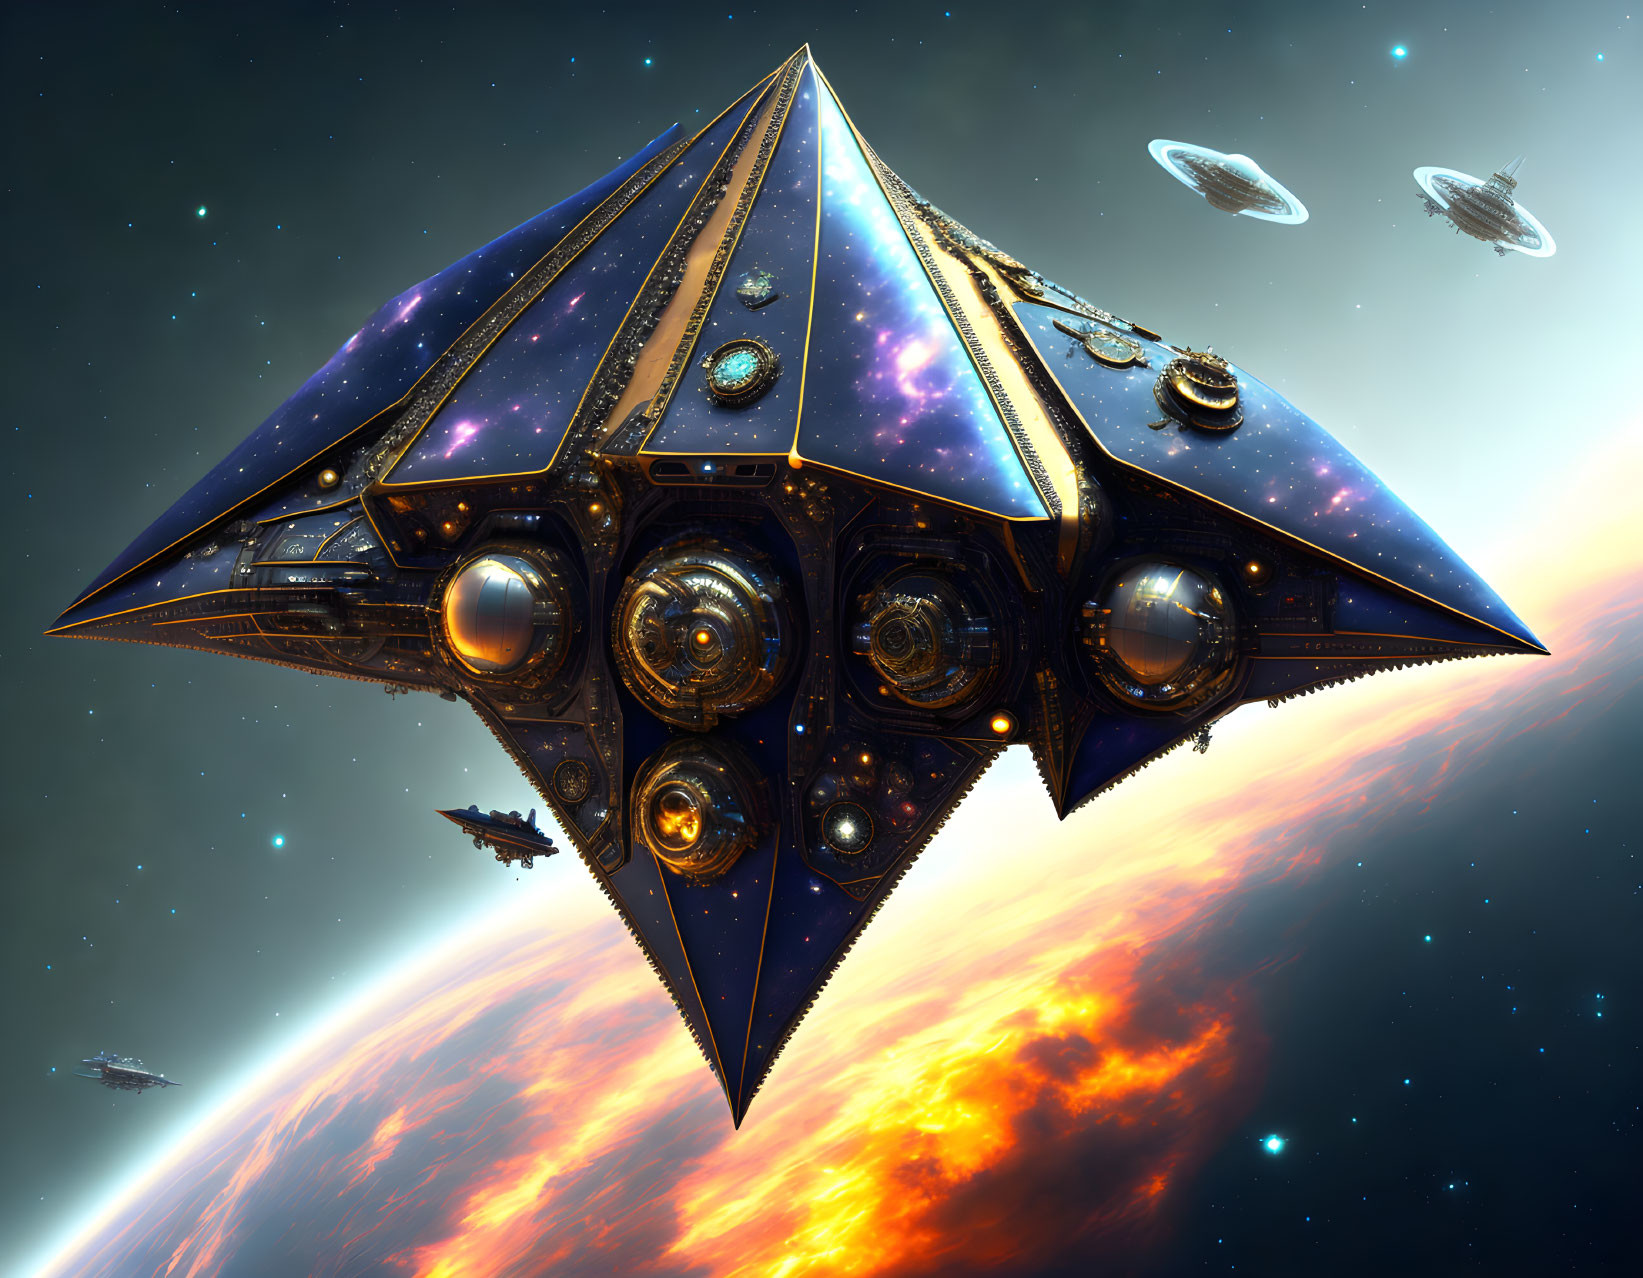 Pyramid-shaped spaceship with lights and patterns near fiery planet